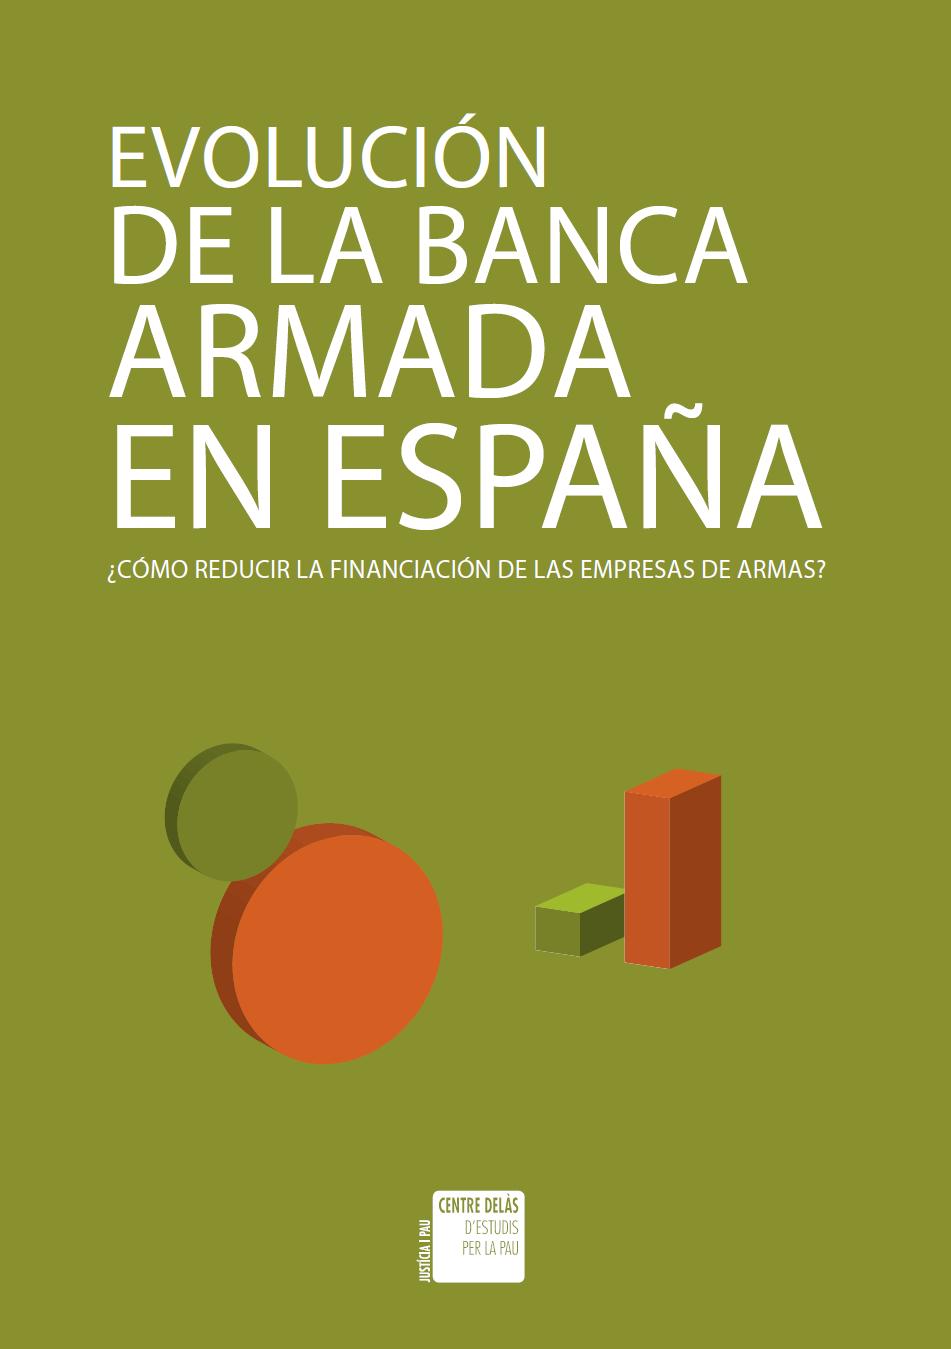 Report 20: The Evolution of the Armed forces in Spain. How to reduce the financing of of weapon companies?